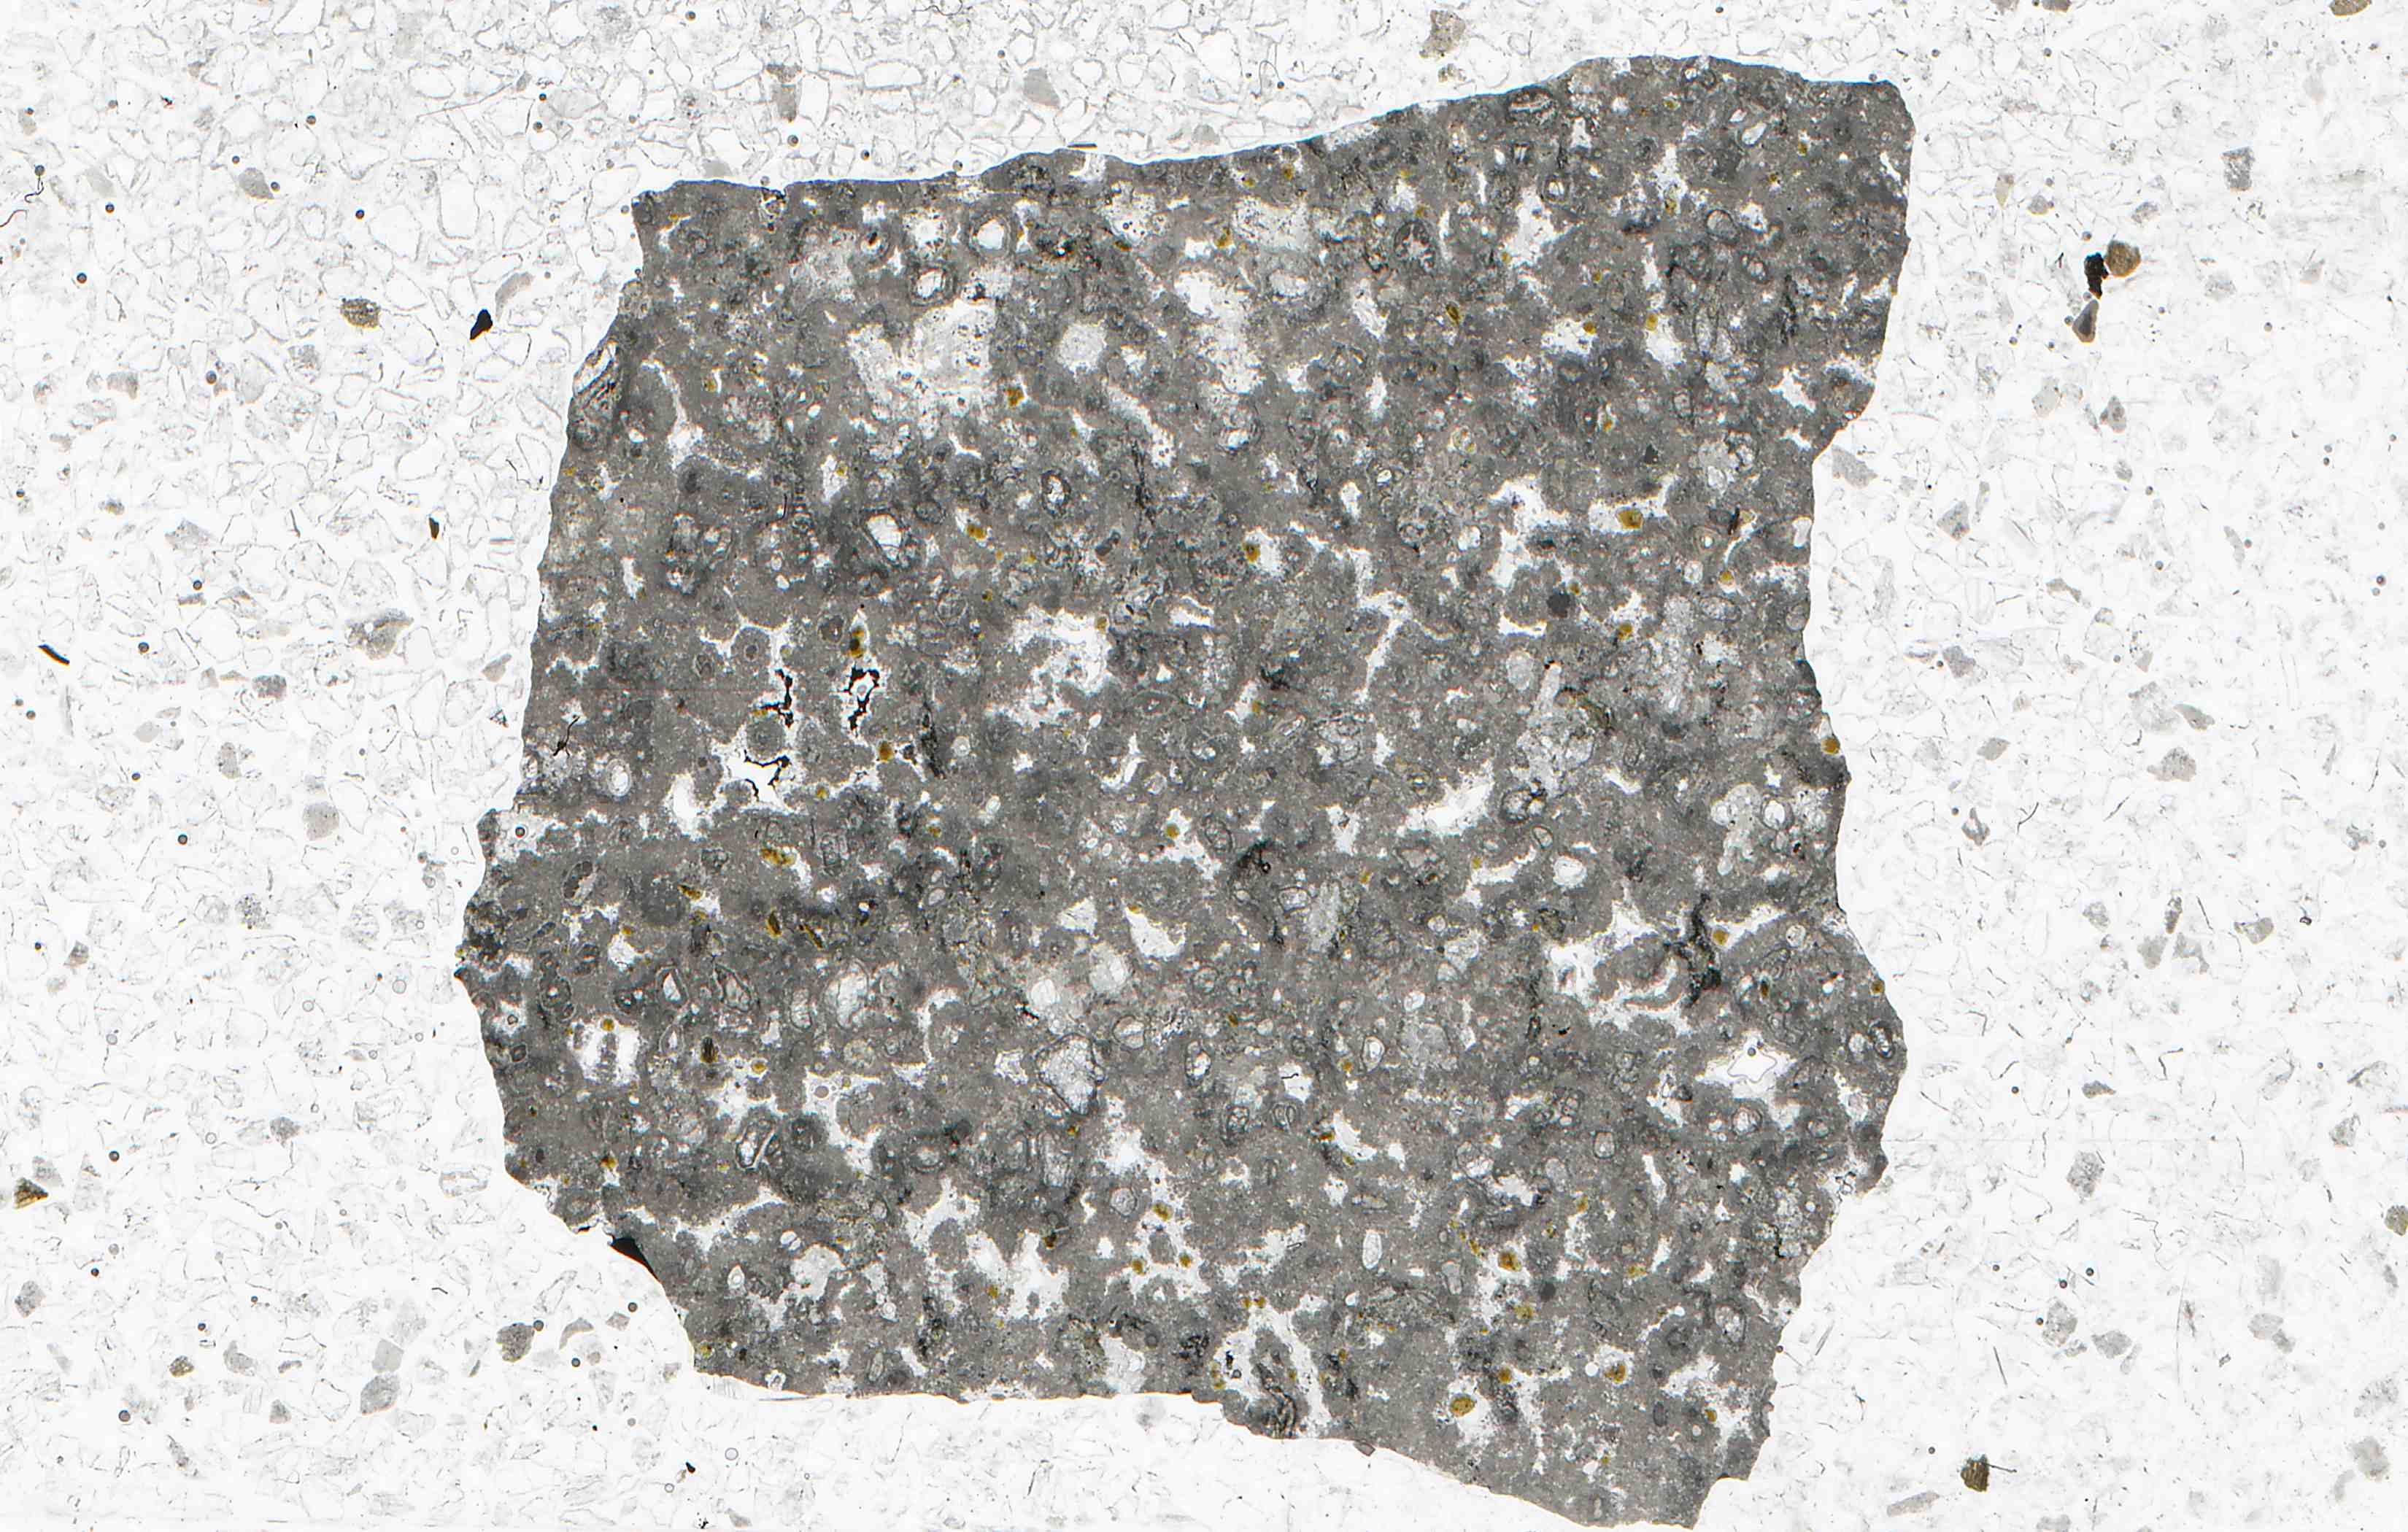 Eifel Germany andradite in thin section